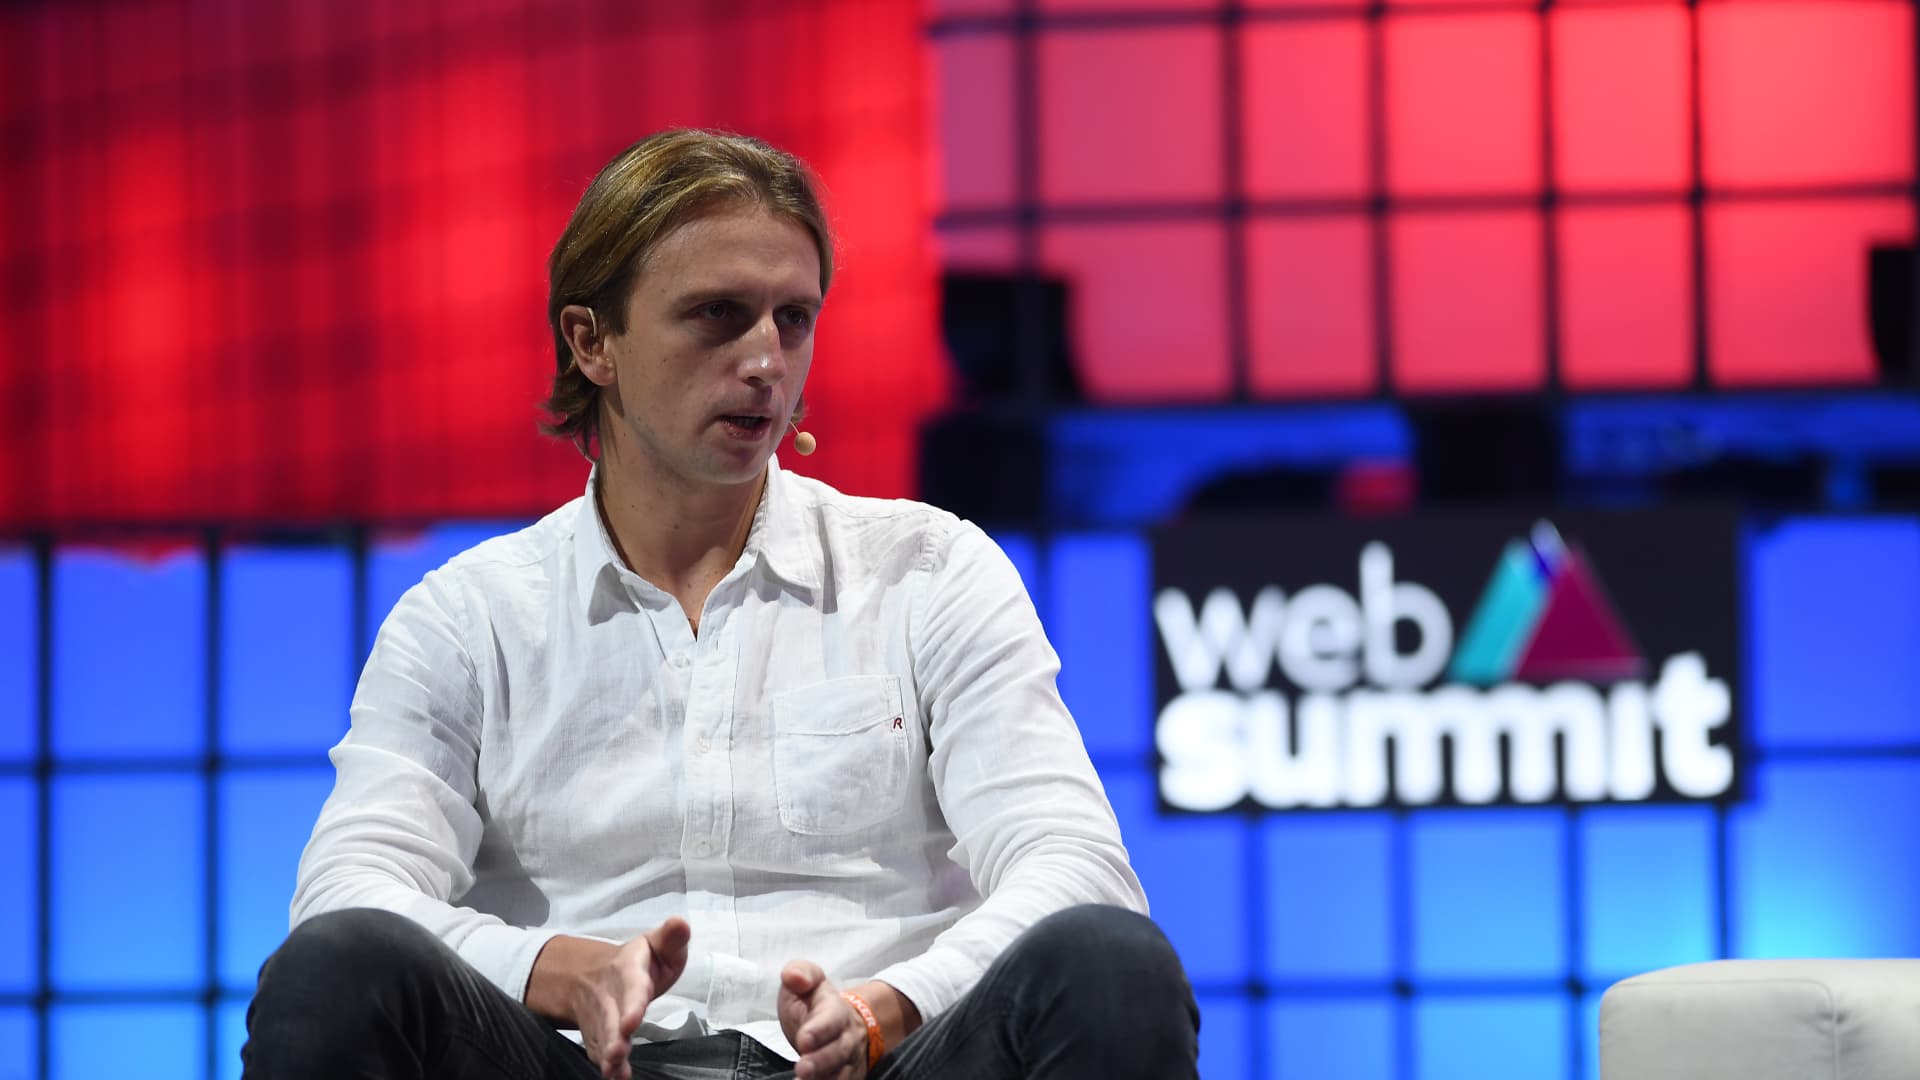 Fintech giant Revolut appoints new UK boss amid struggles to get banking license